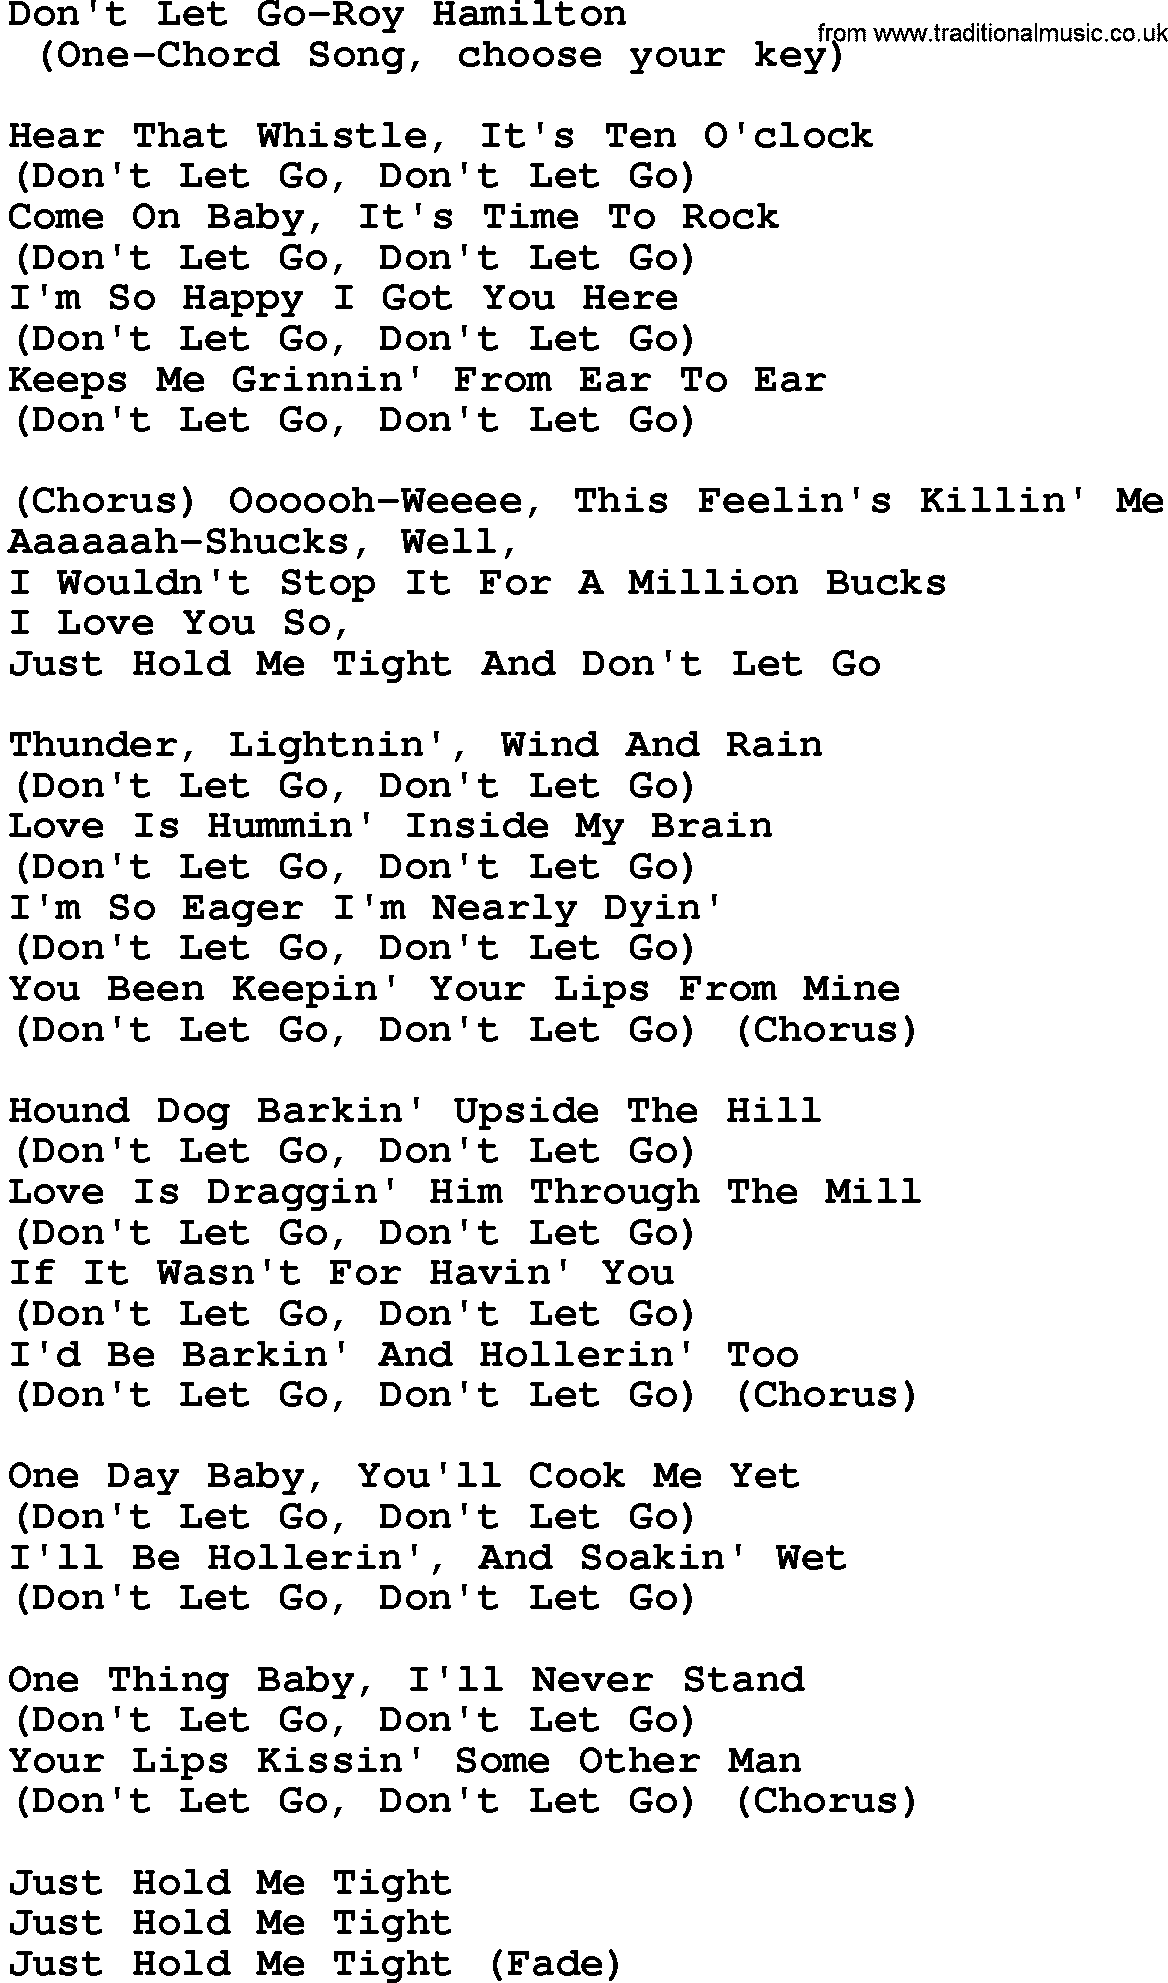 Country music song: Don't Let Go-Roy Hamilton lyrics and chords